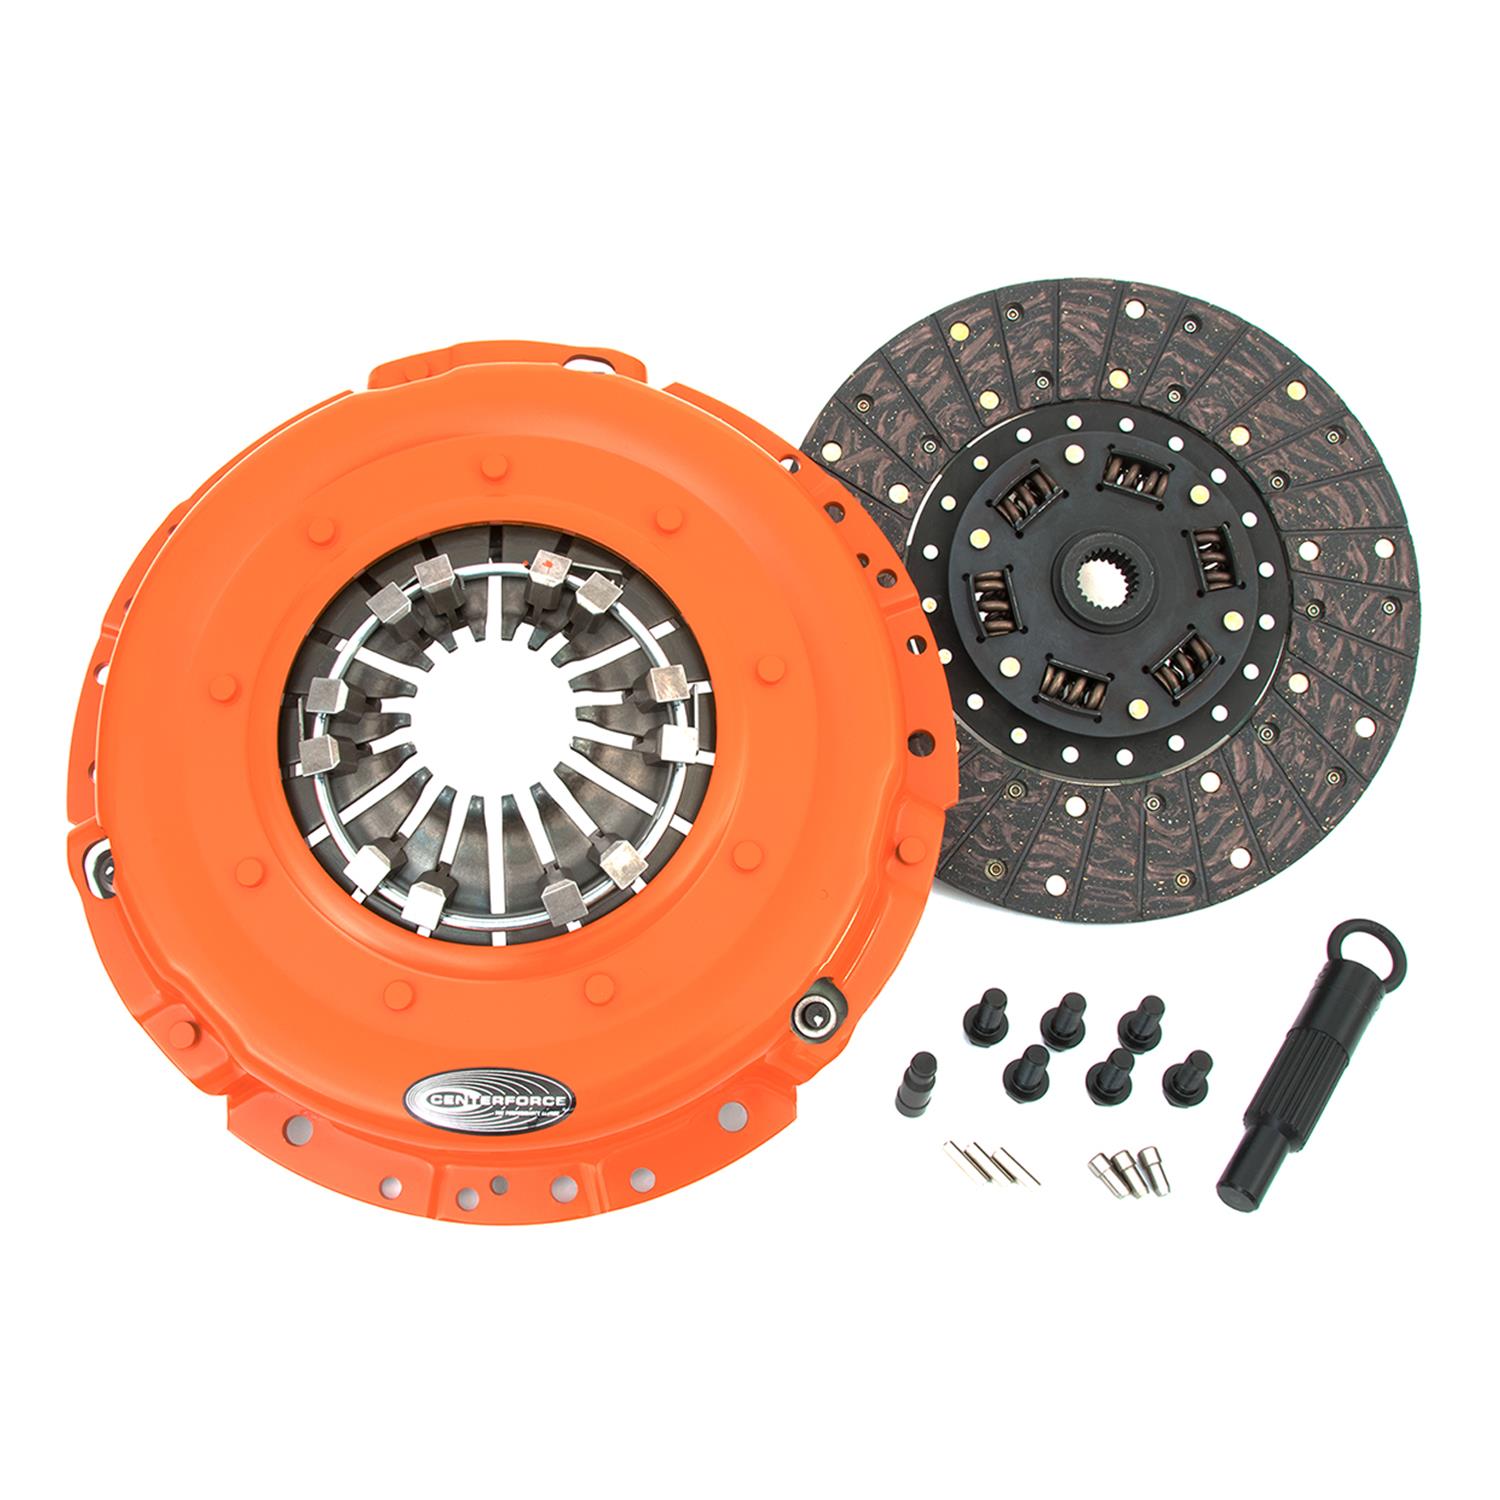 Centerforce DF023500 Centerforce Dual Friction Clutch Kits | Summit Racing